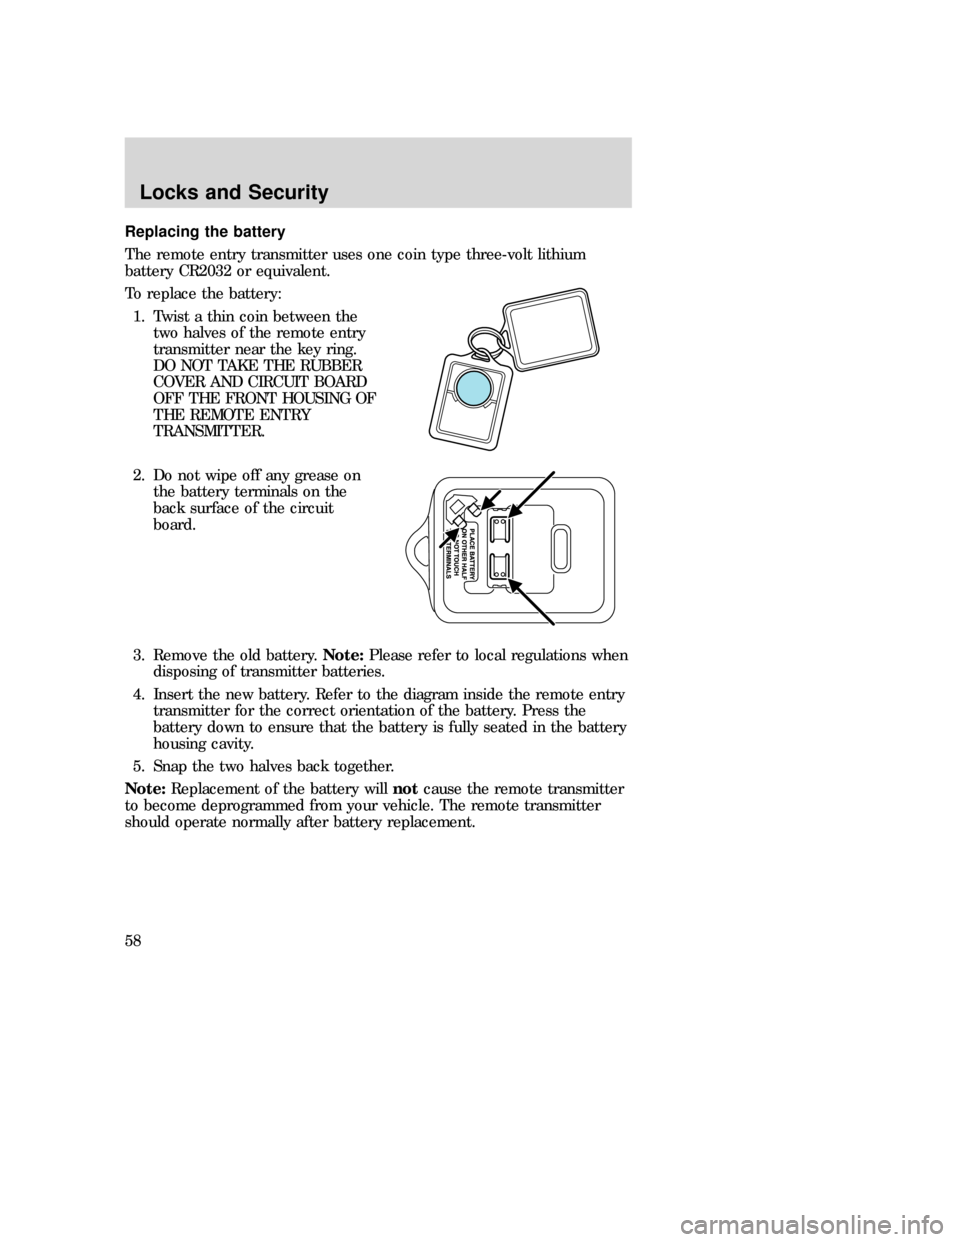 MAZDA MODEL B-SERIES 2006  Owners Manual (in English) Replacing the battery
The remote entry transmitter uses one coin type three-volt lithium
battery CR2032 or equivalent.
To replace the battery:
1. Twist a thin coin between the
two halves of the remote